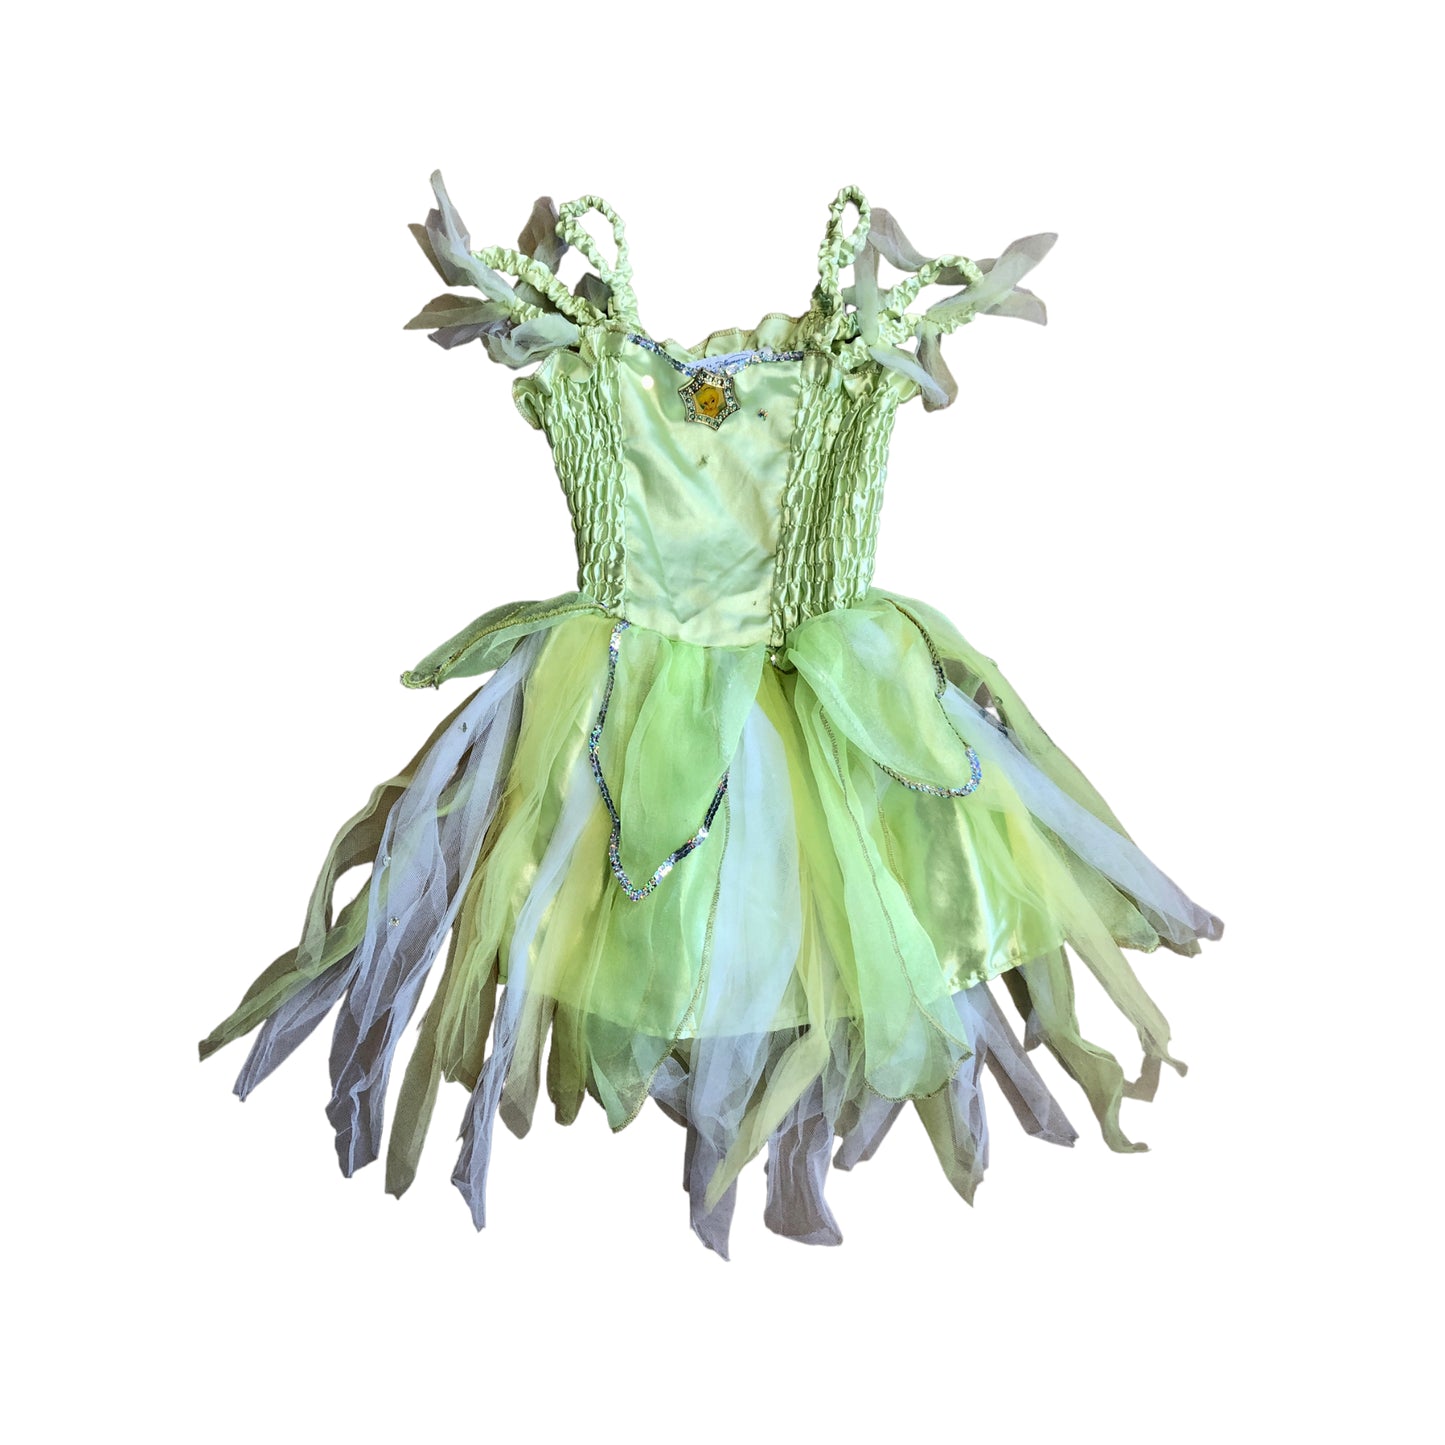 Disney ® Tinker Bell Costume (6 years old)